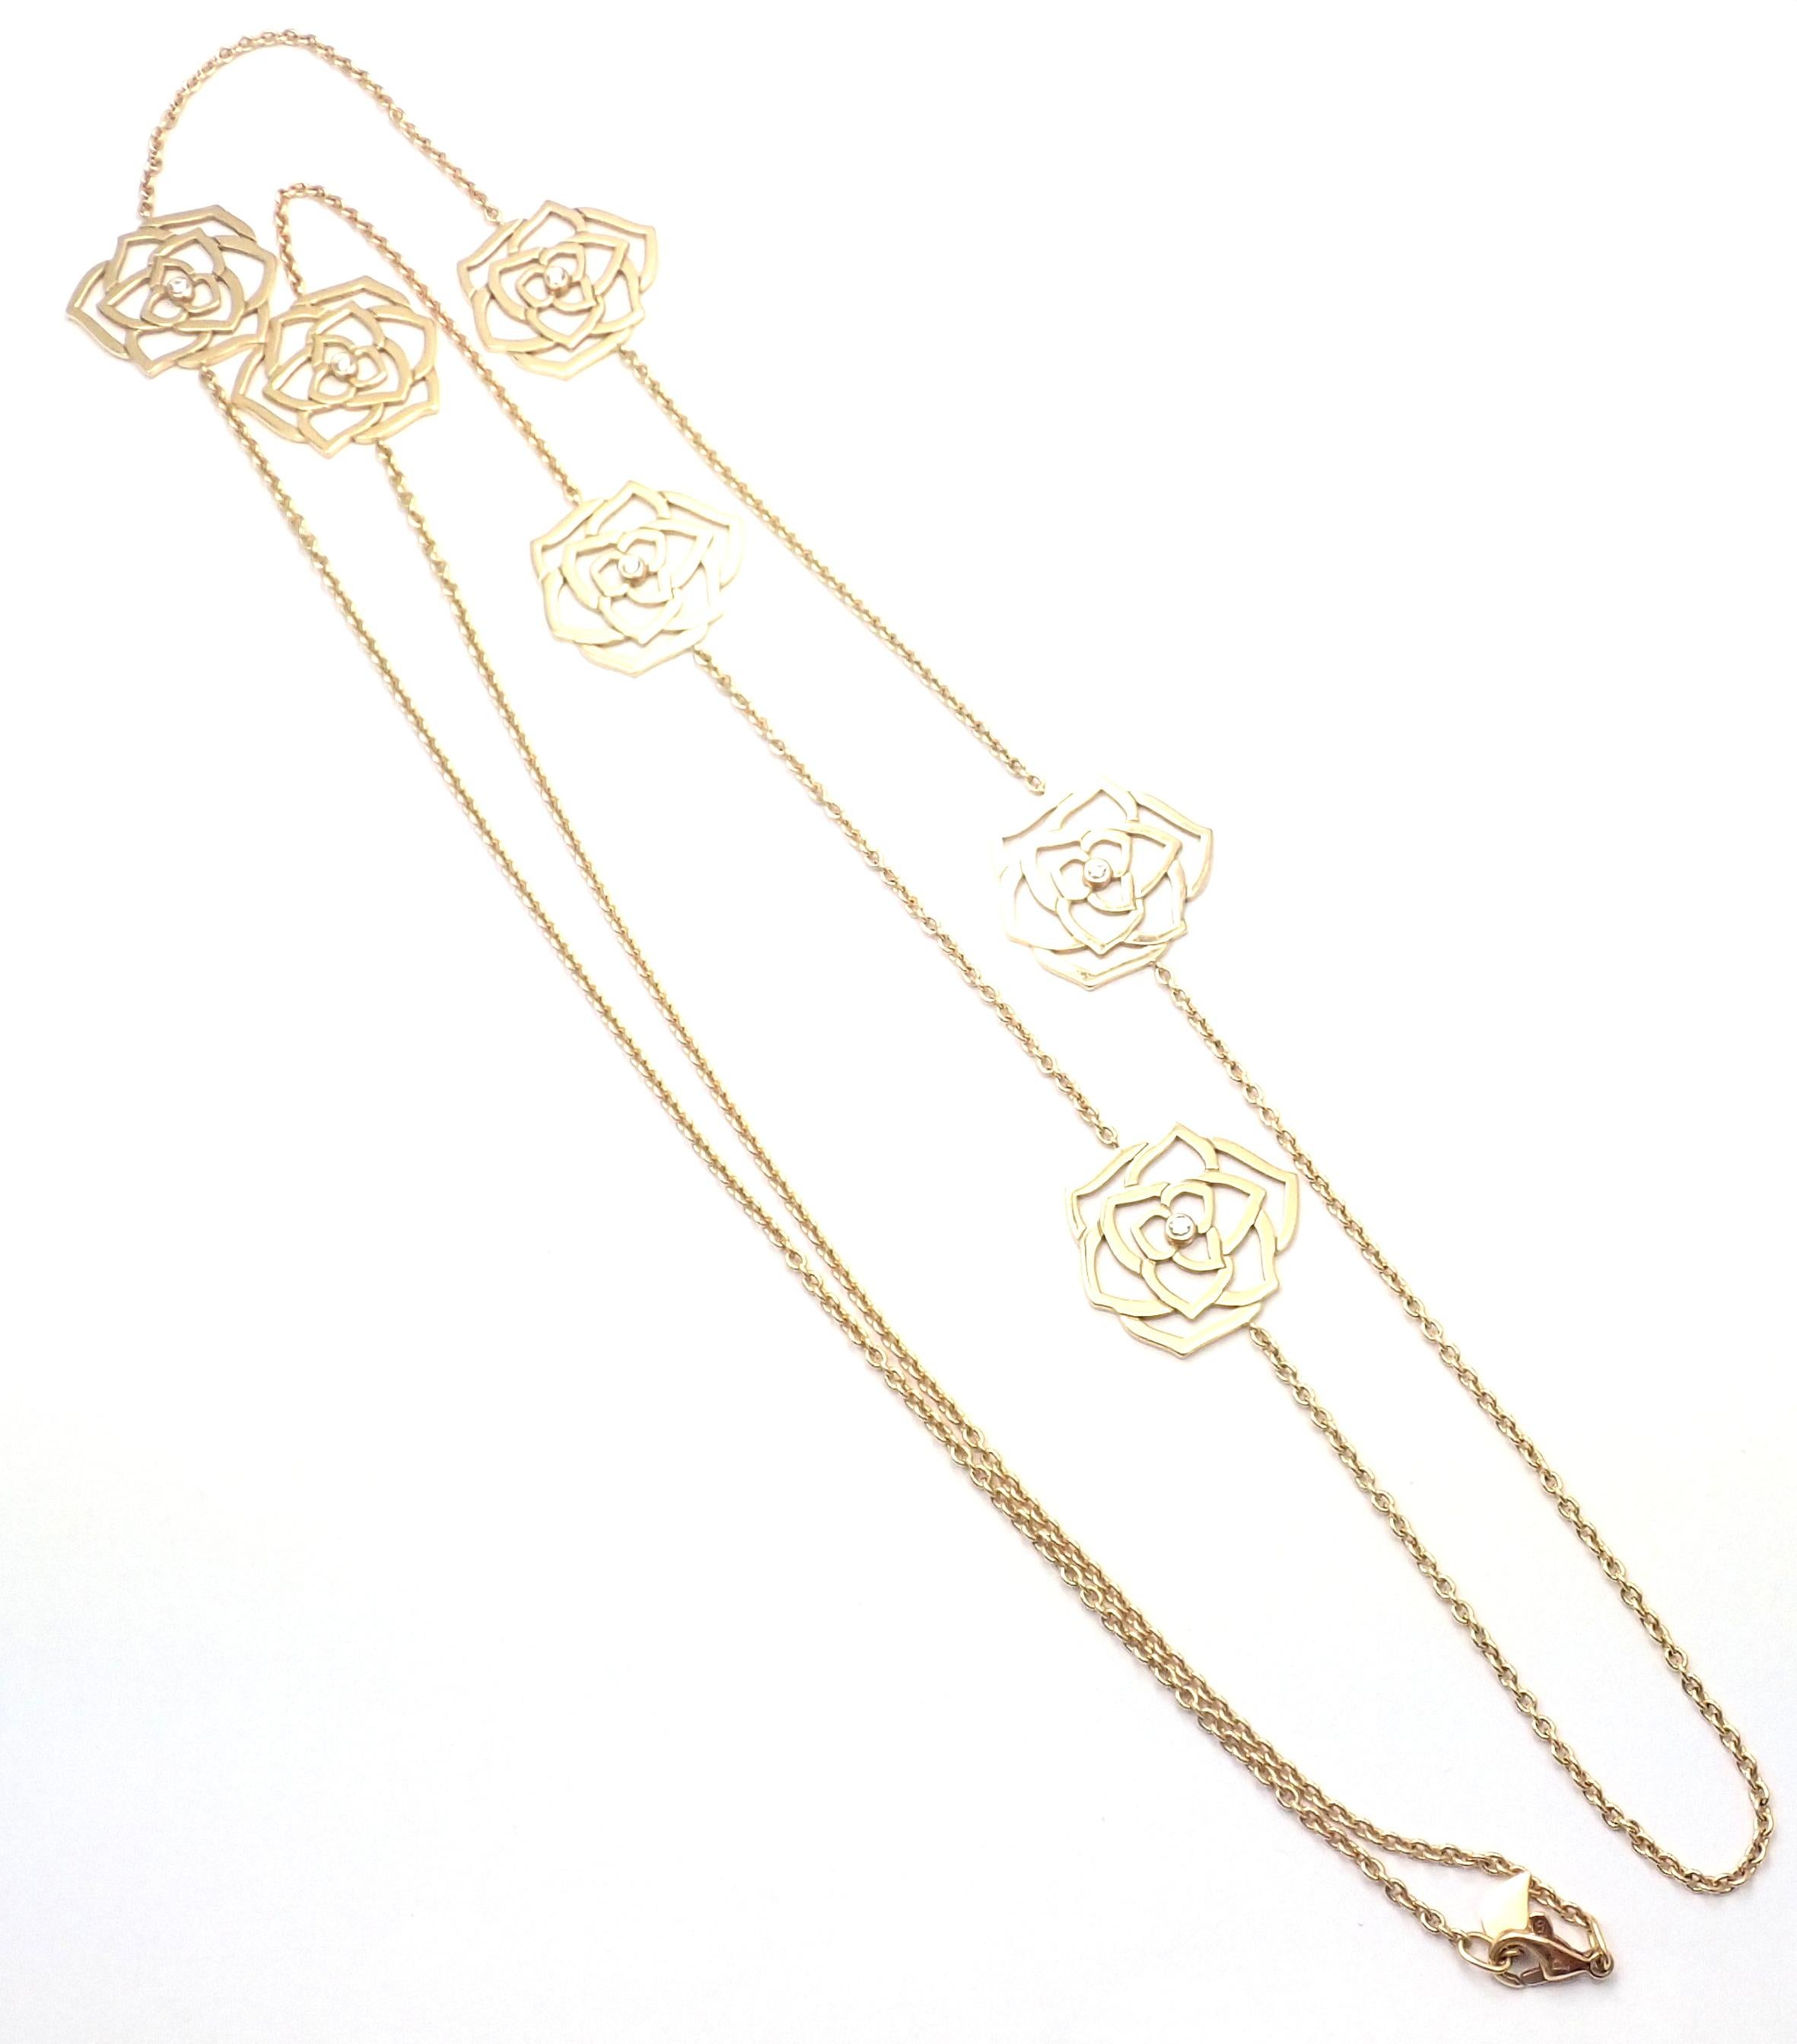 Brilliant Cut Piaget Diamond Rose Flower Long Yellow Gold Chain Necklace